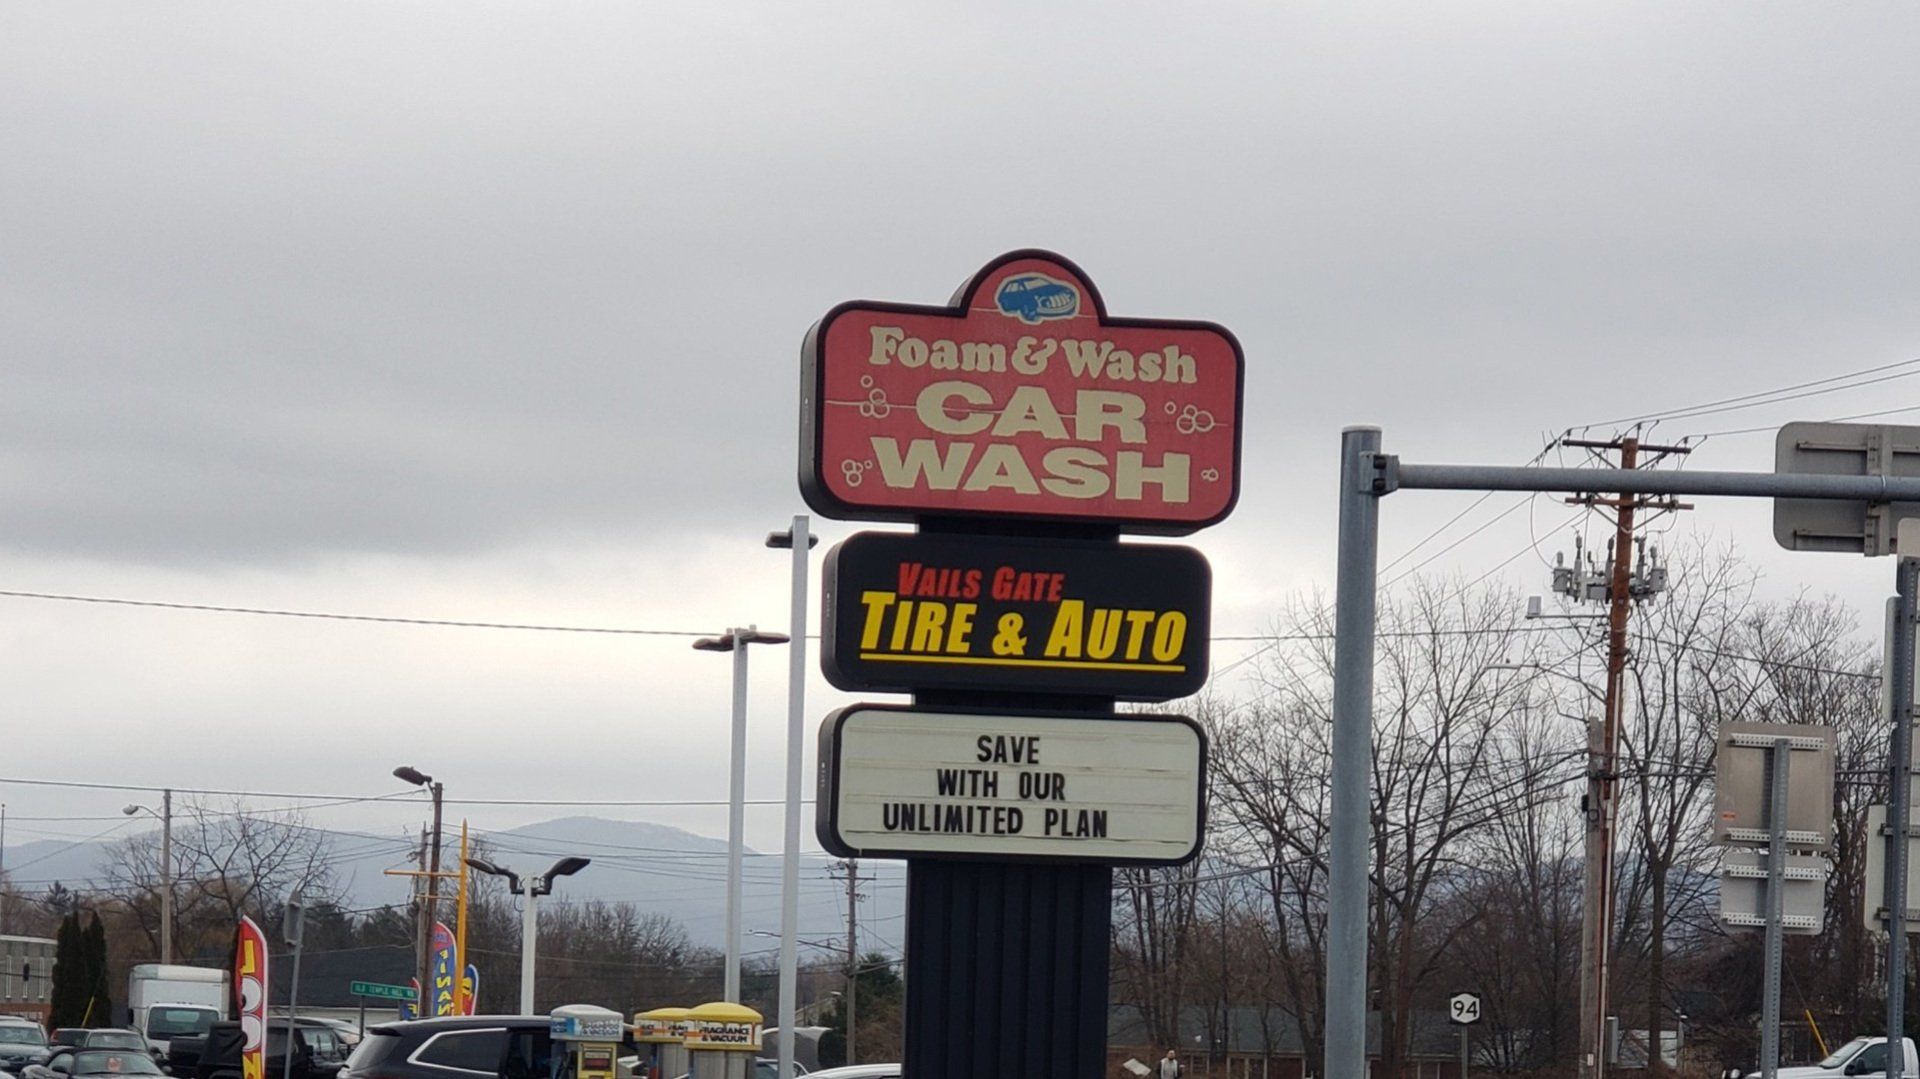 Foam & Wash Car Wash - Vails Gate Tire & Auto - 898 Blooming Grove Tpke New Windsor, NY 12553